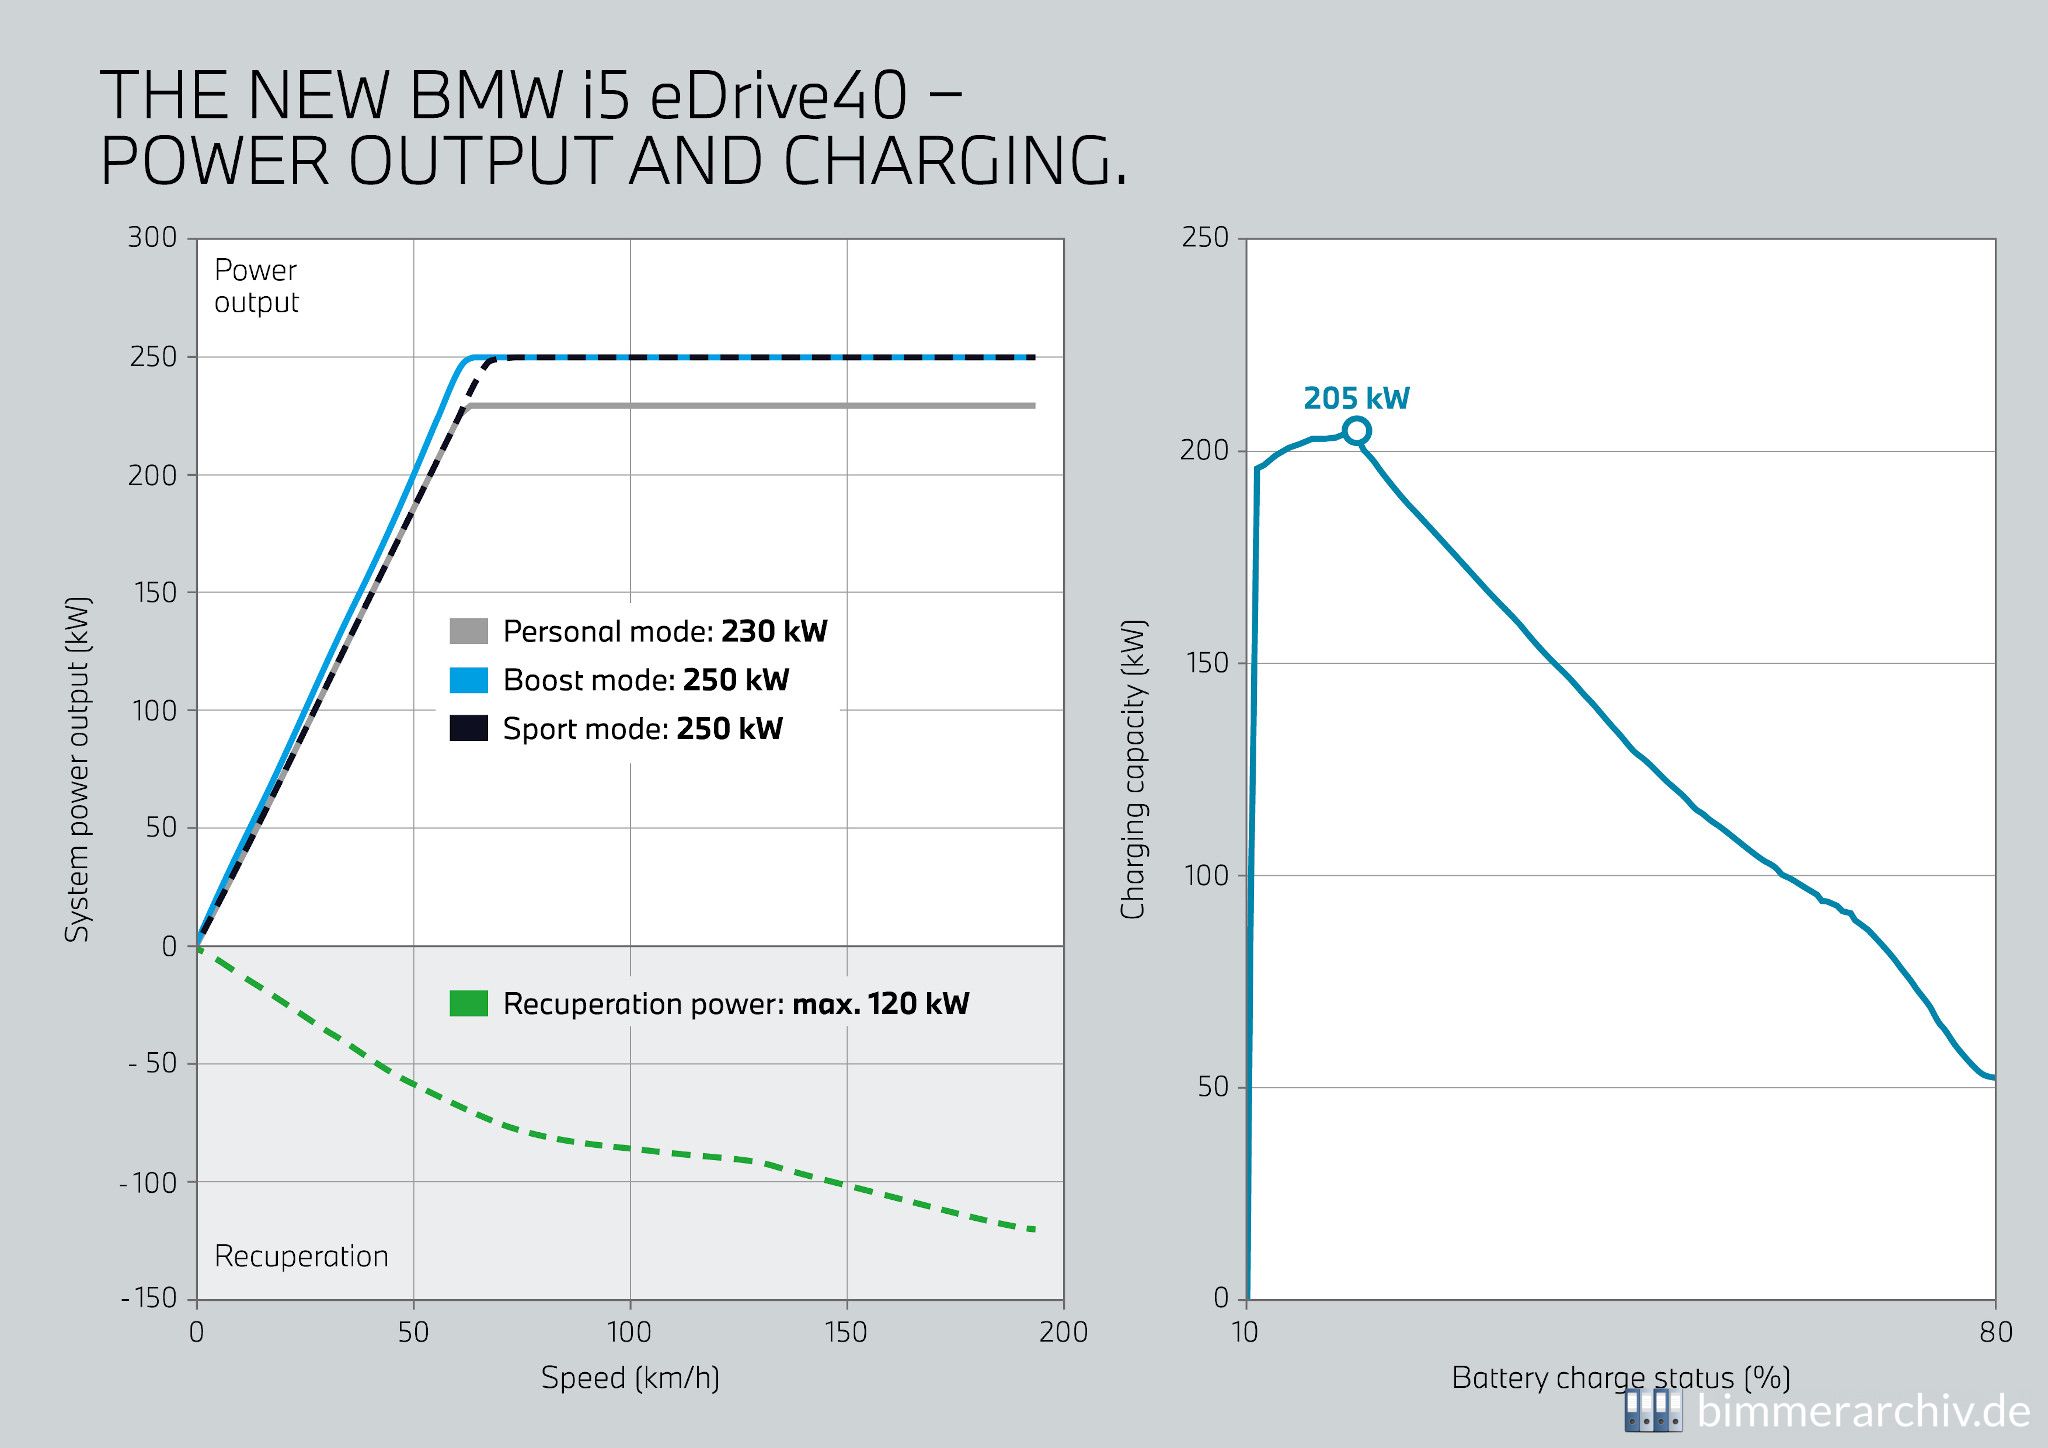 BMW i5 eDrive40 - Power output and charging